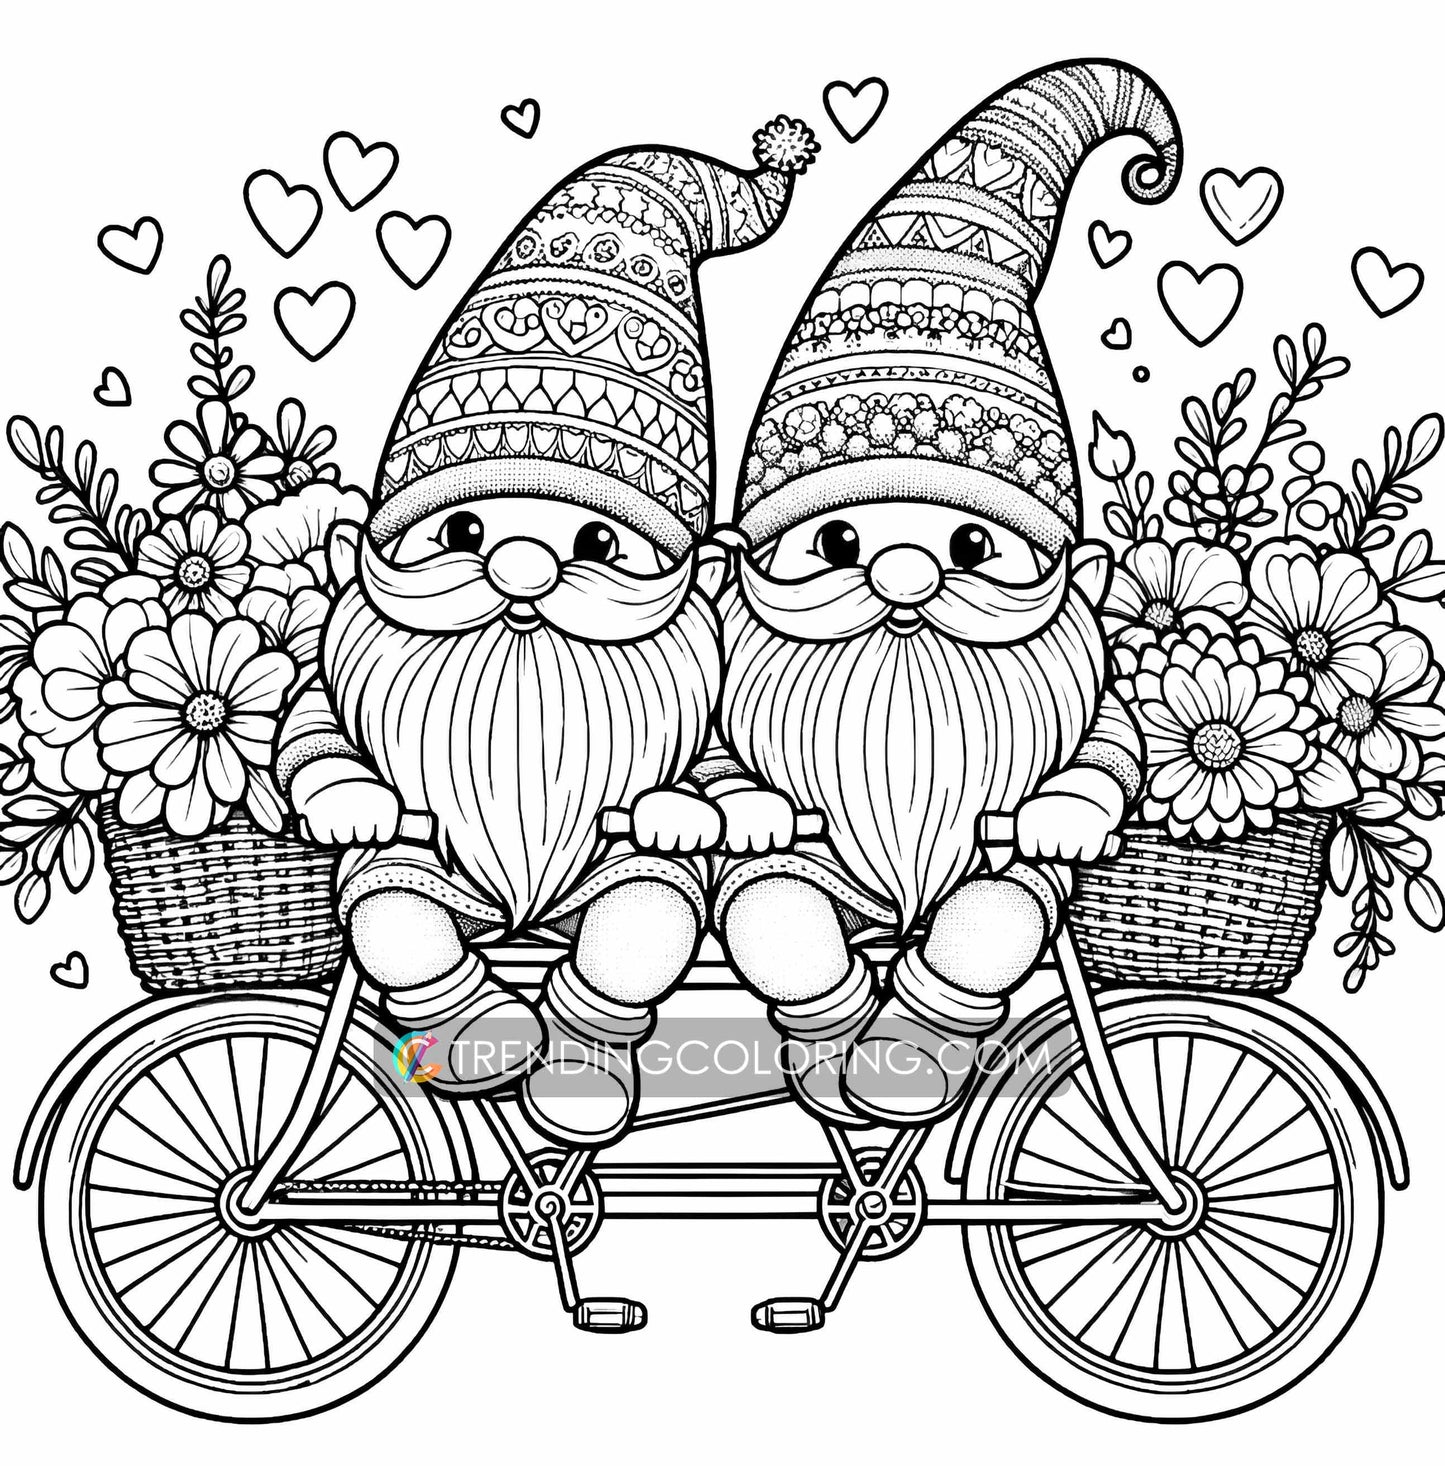 50 Valentine Gnome Coloring Pages - Instant Download - Printable